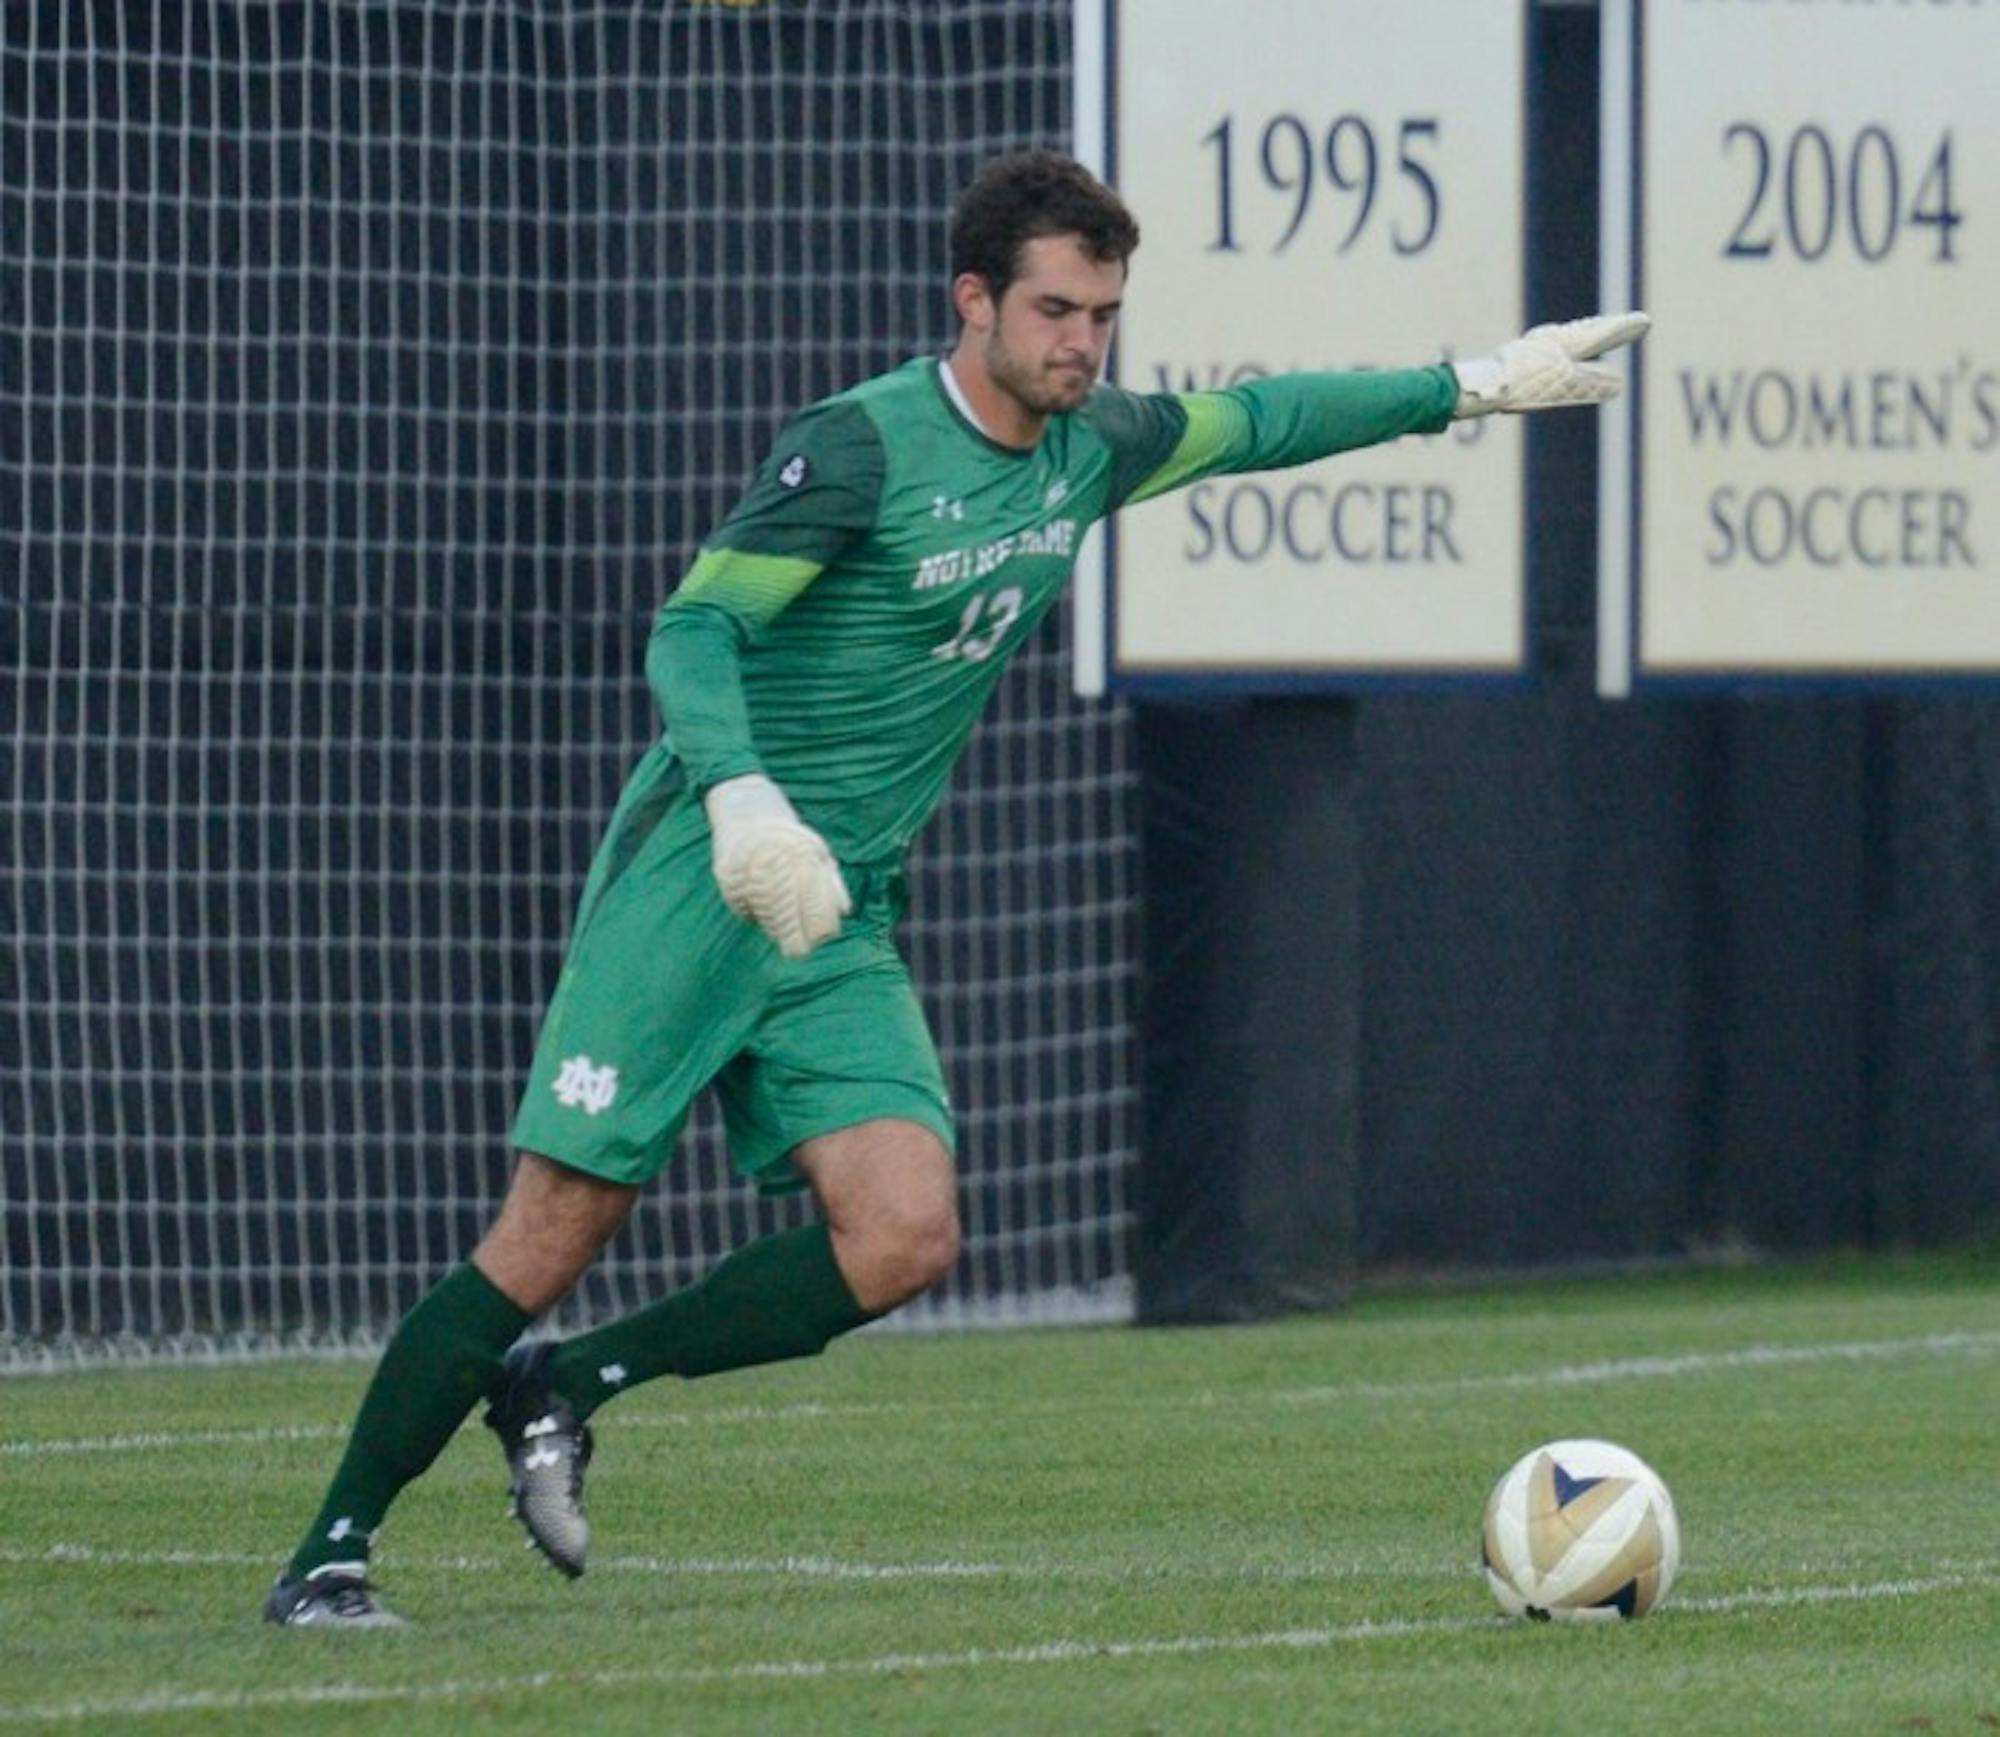 Irish junior goalkeeper Chris Hubbard approaches a goal kick during Notre Dame’s 2-0 victory over South Florida on Sept. 4 at Alumni Stadium. Hubbard has yet to allow a goal this season.